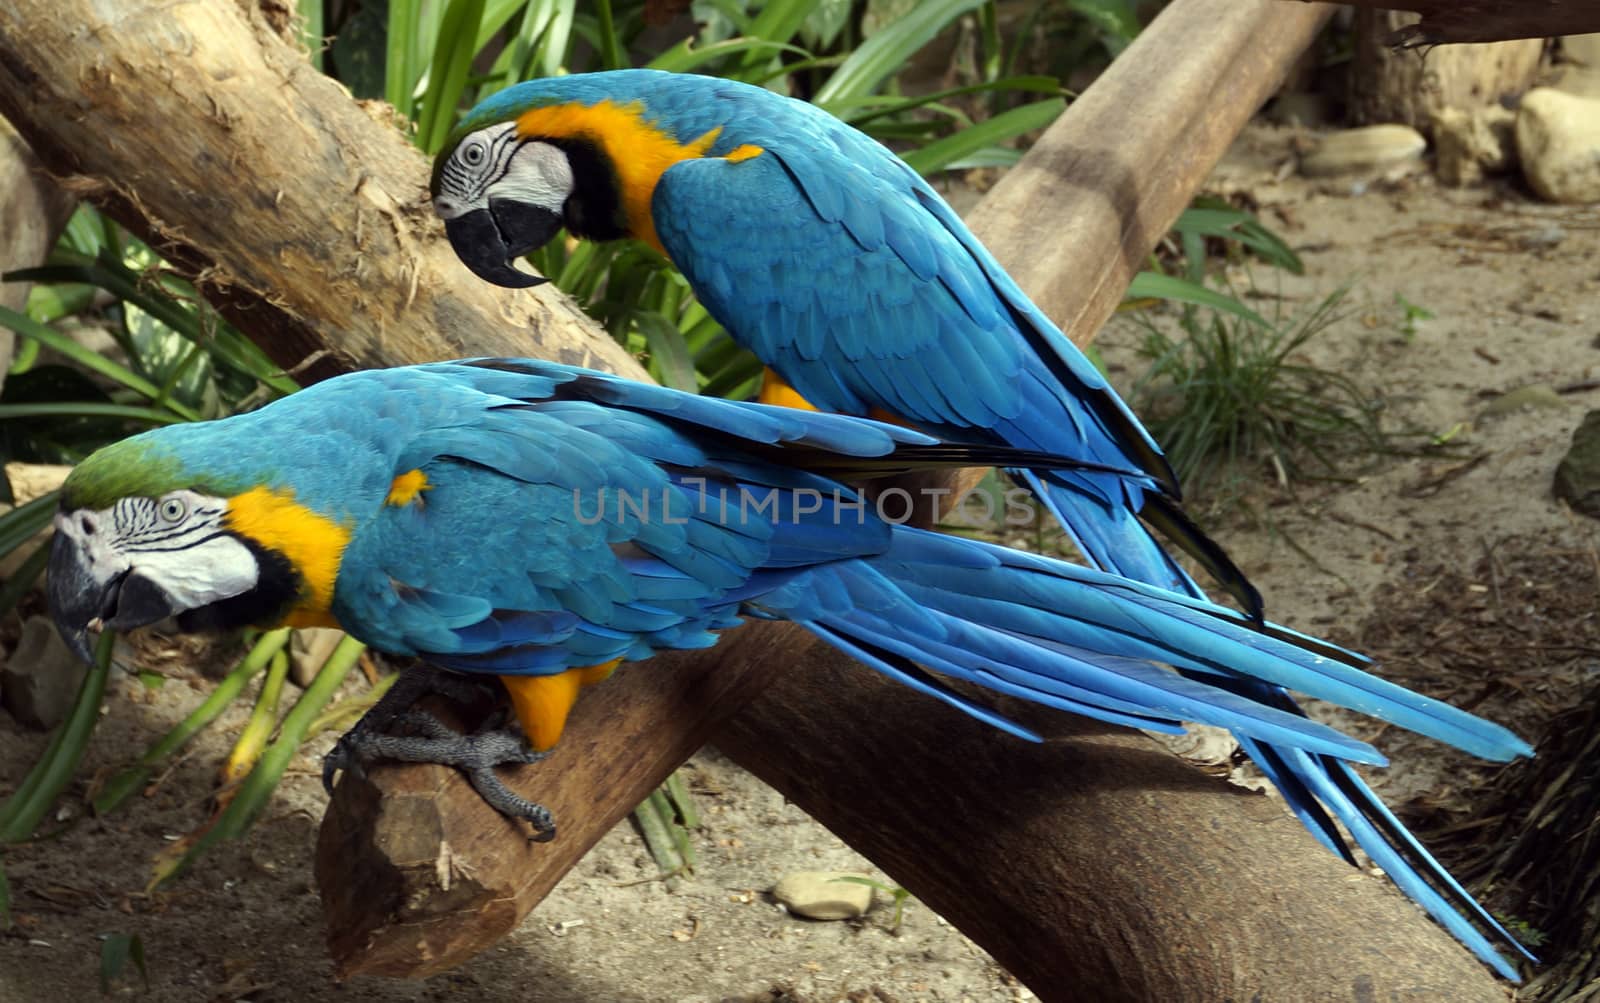 Beautiful parrots sitting on a branch.